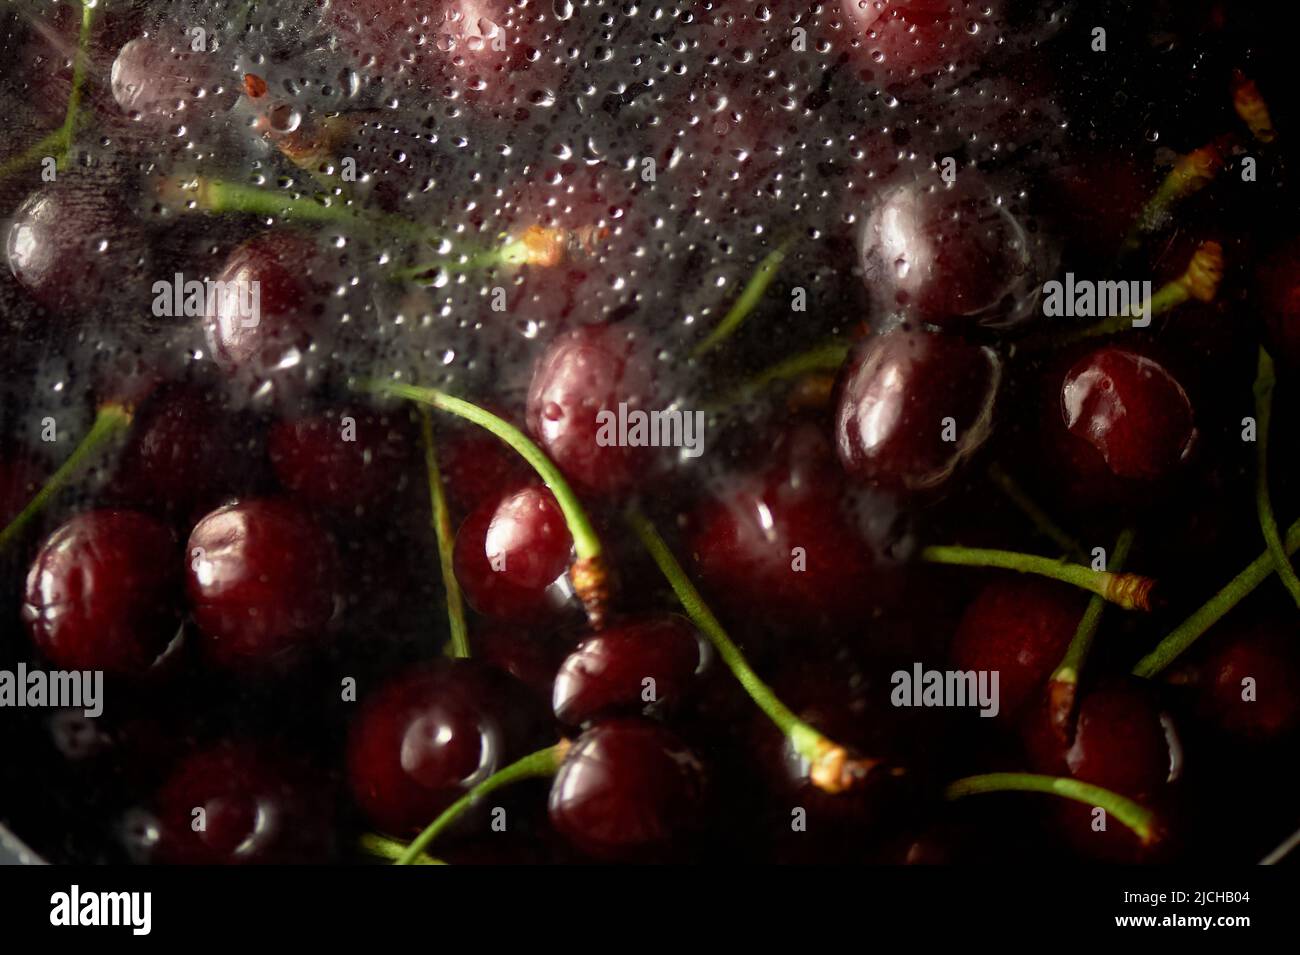 Juicy cherries or cherries in the water under the fogged glass. Vitamins and berries. Juiciness. Stock Photo